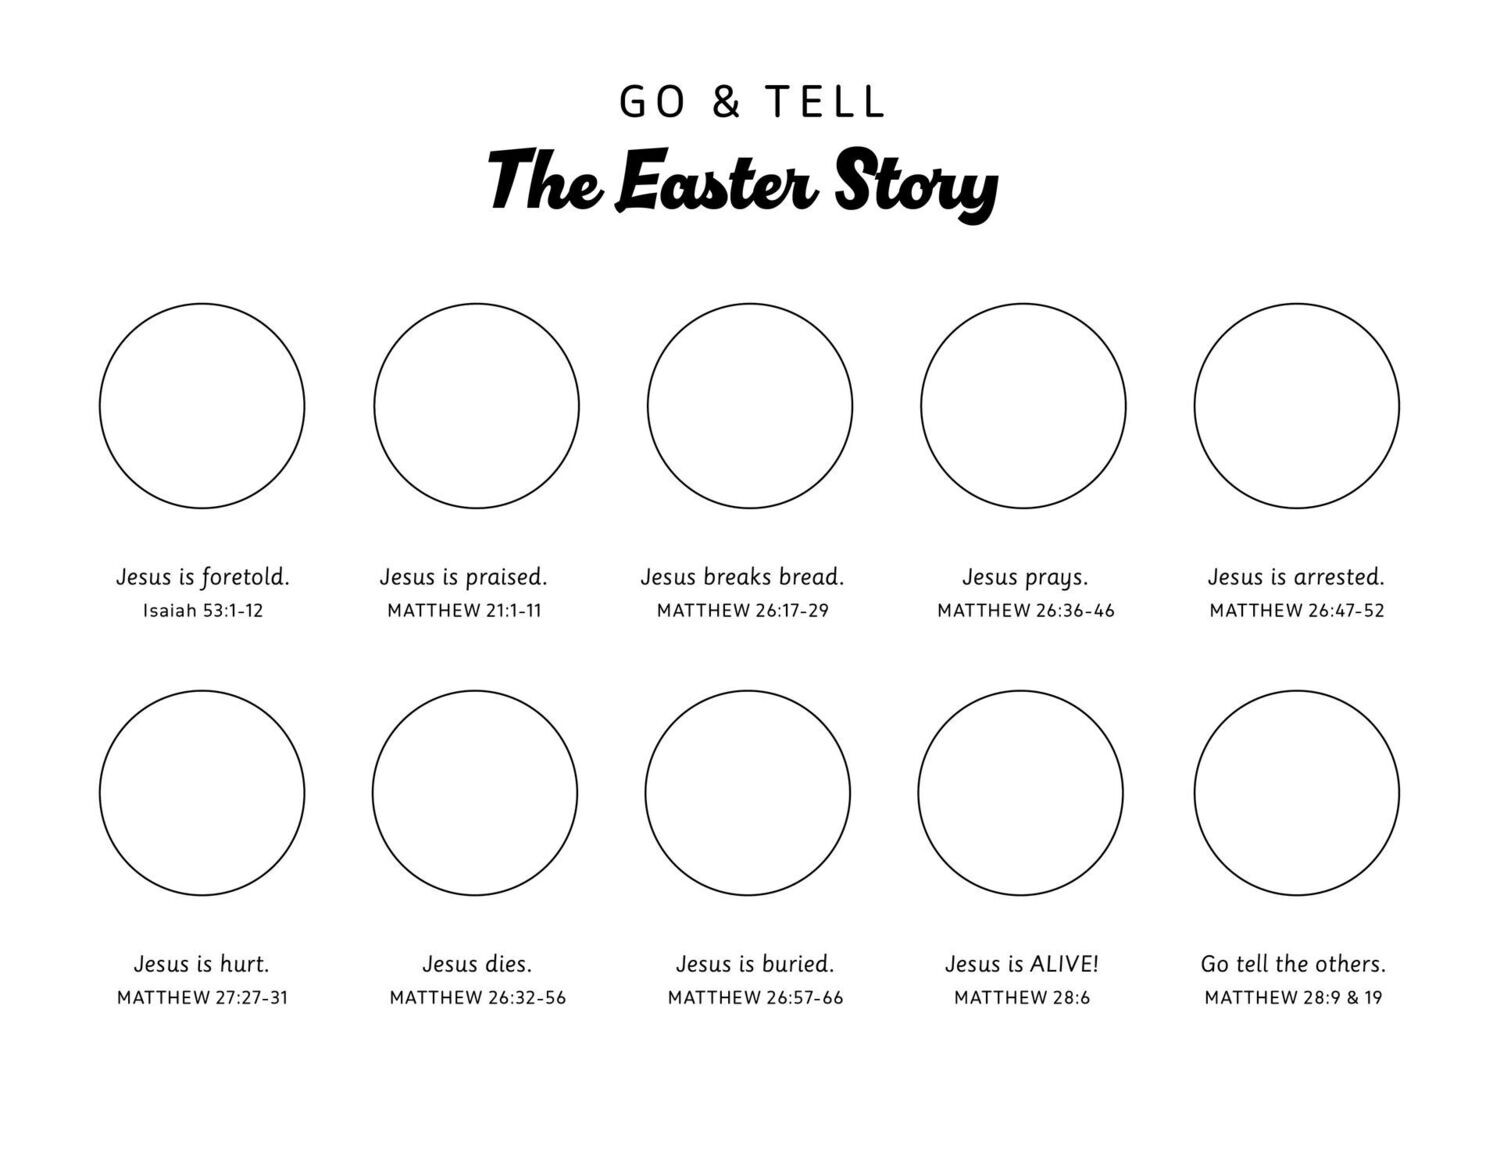 Go Tell the Easter Story downloadable pdf